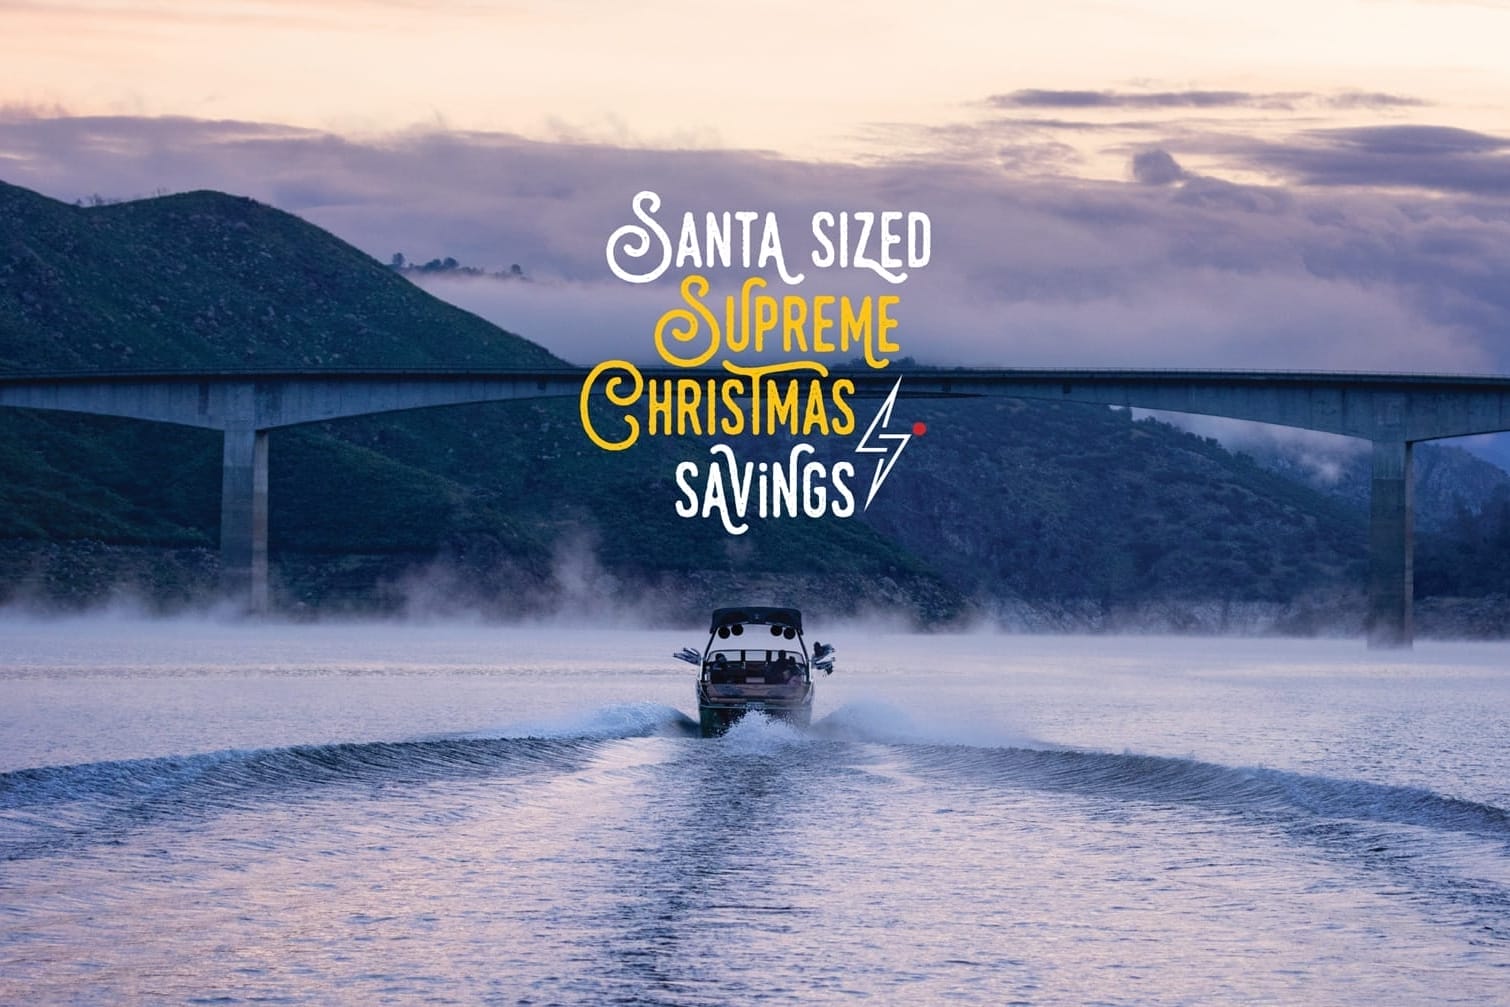 A boat on the water with a bridge in the background, showcasing Santa-Sized savings during this Supreme Christmas season.